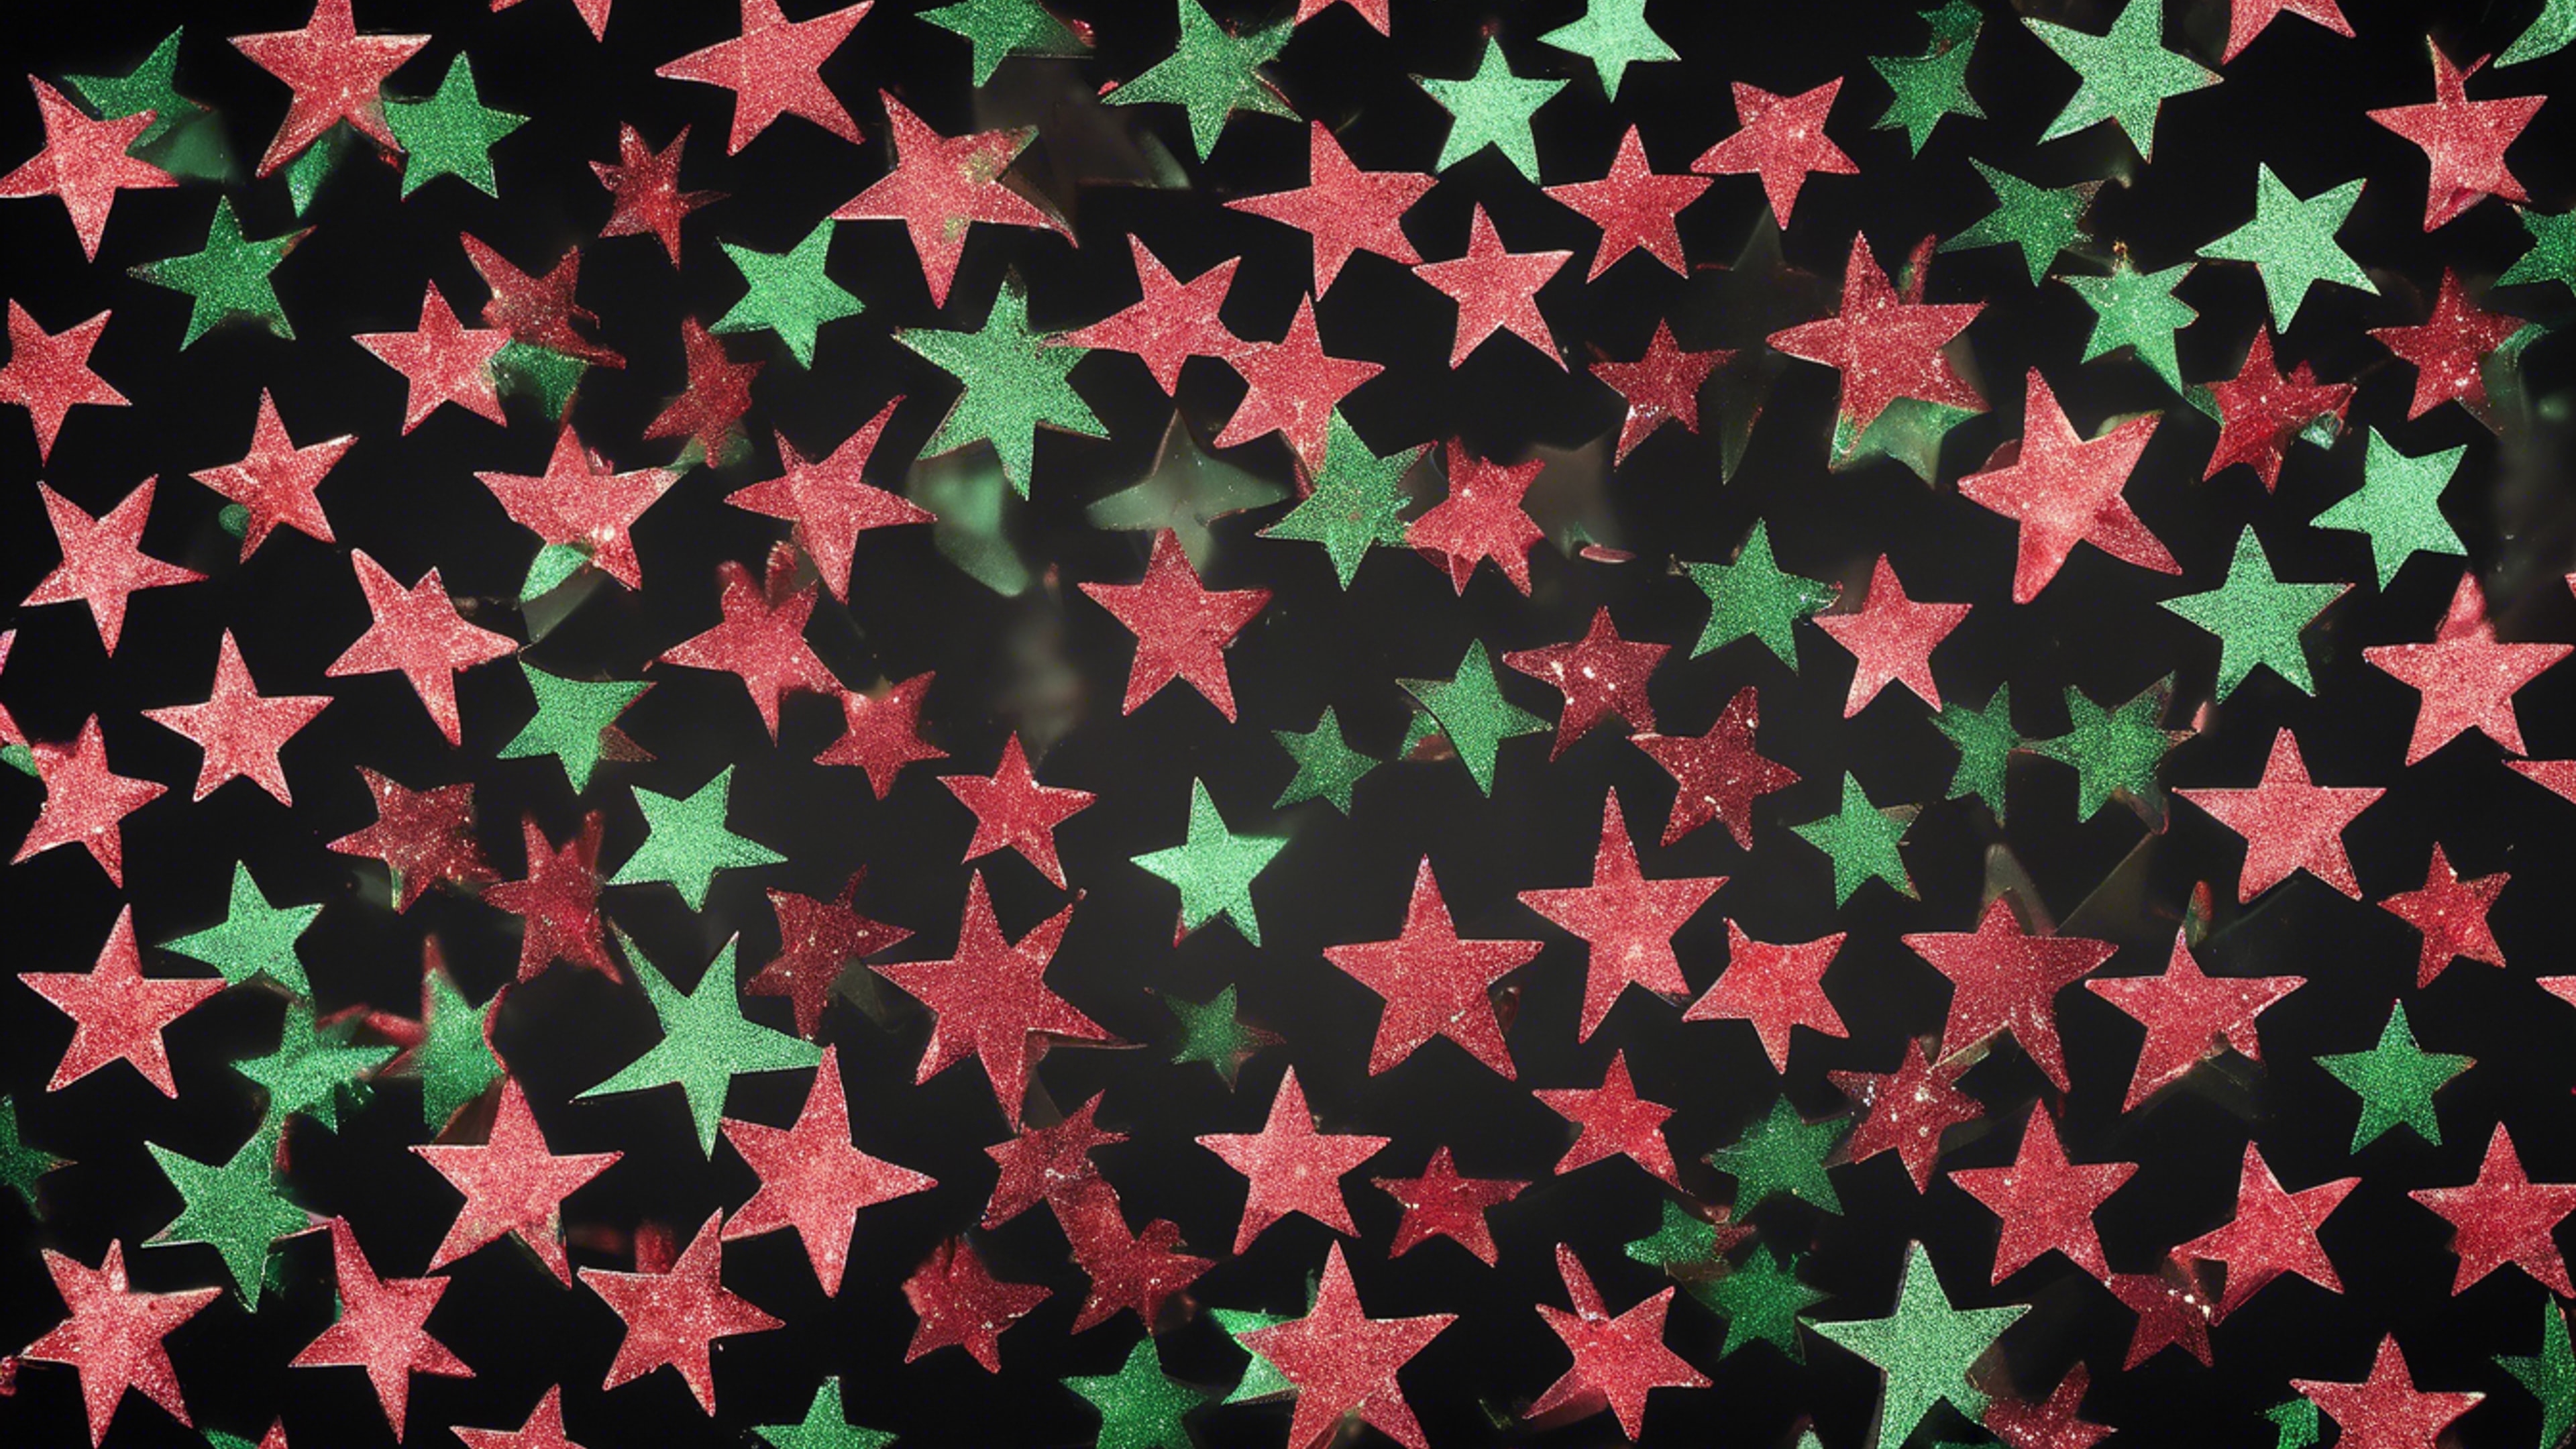 Green and red glitter forming star shapes on a black background壁紙[2fe752b5dc5f4f35ba35]